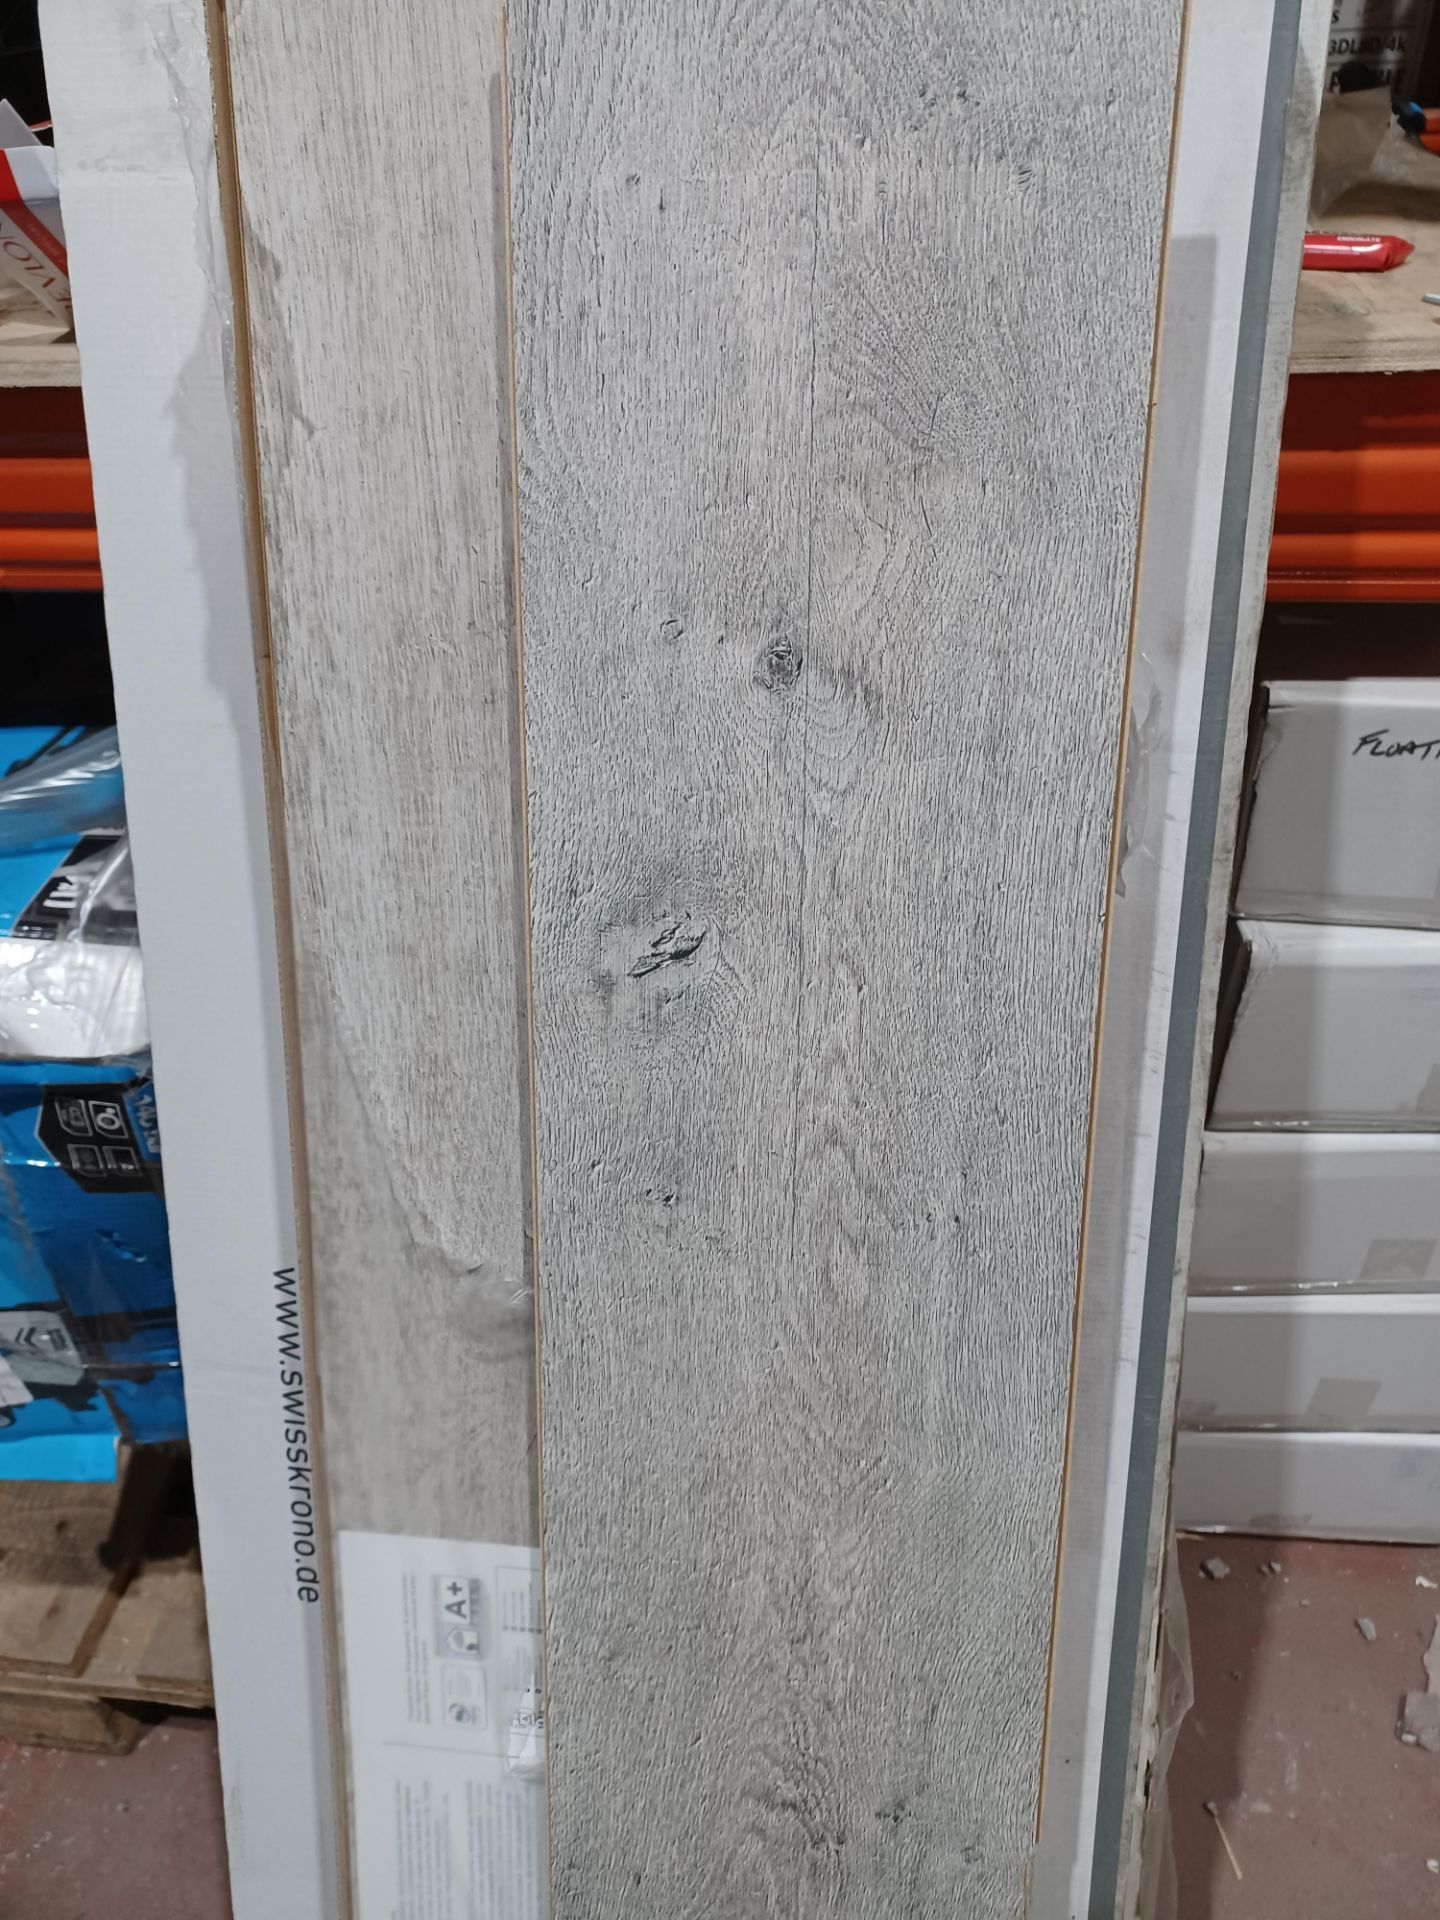 12 X PACKS OF ABERFELDY GREY OAK EFFECT LAMINATE FLOORING. EACH PACK CONTAINS 1.99M2, GIVING THIS - Image 2 of 2